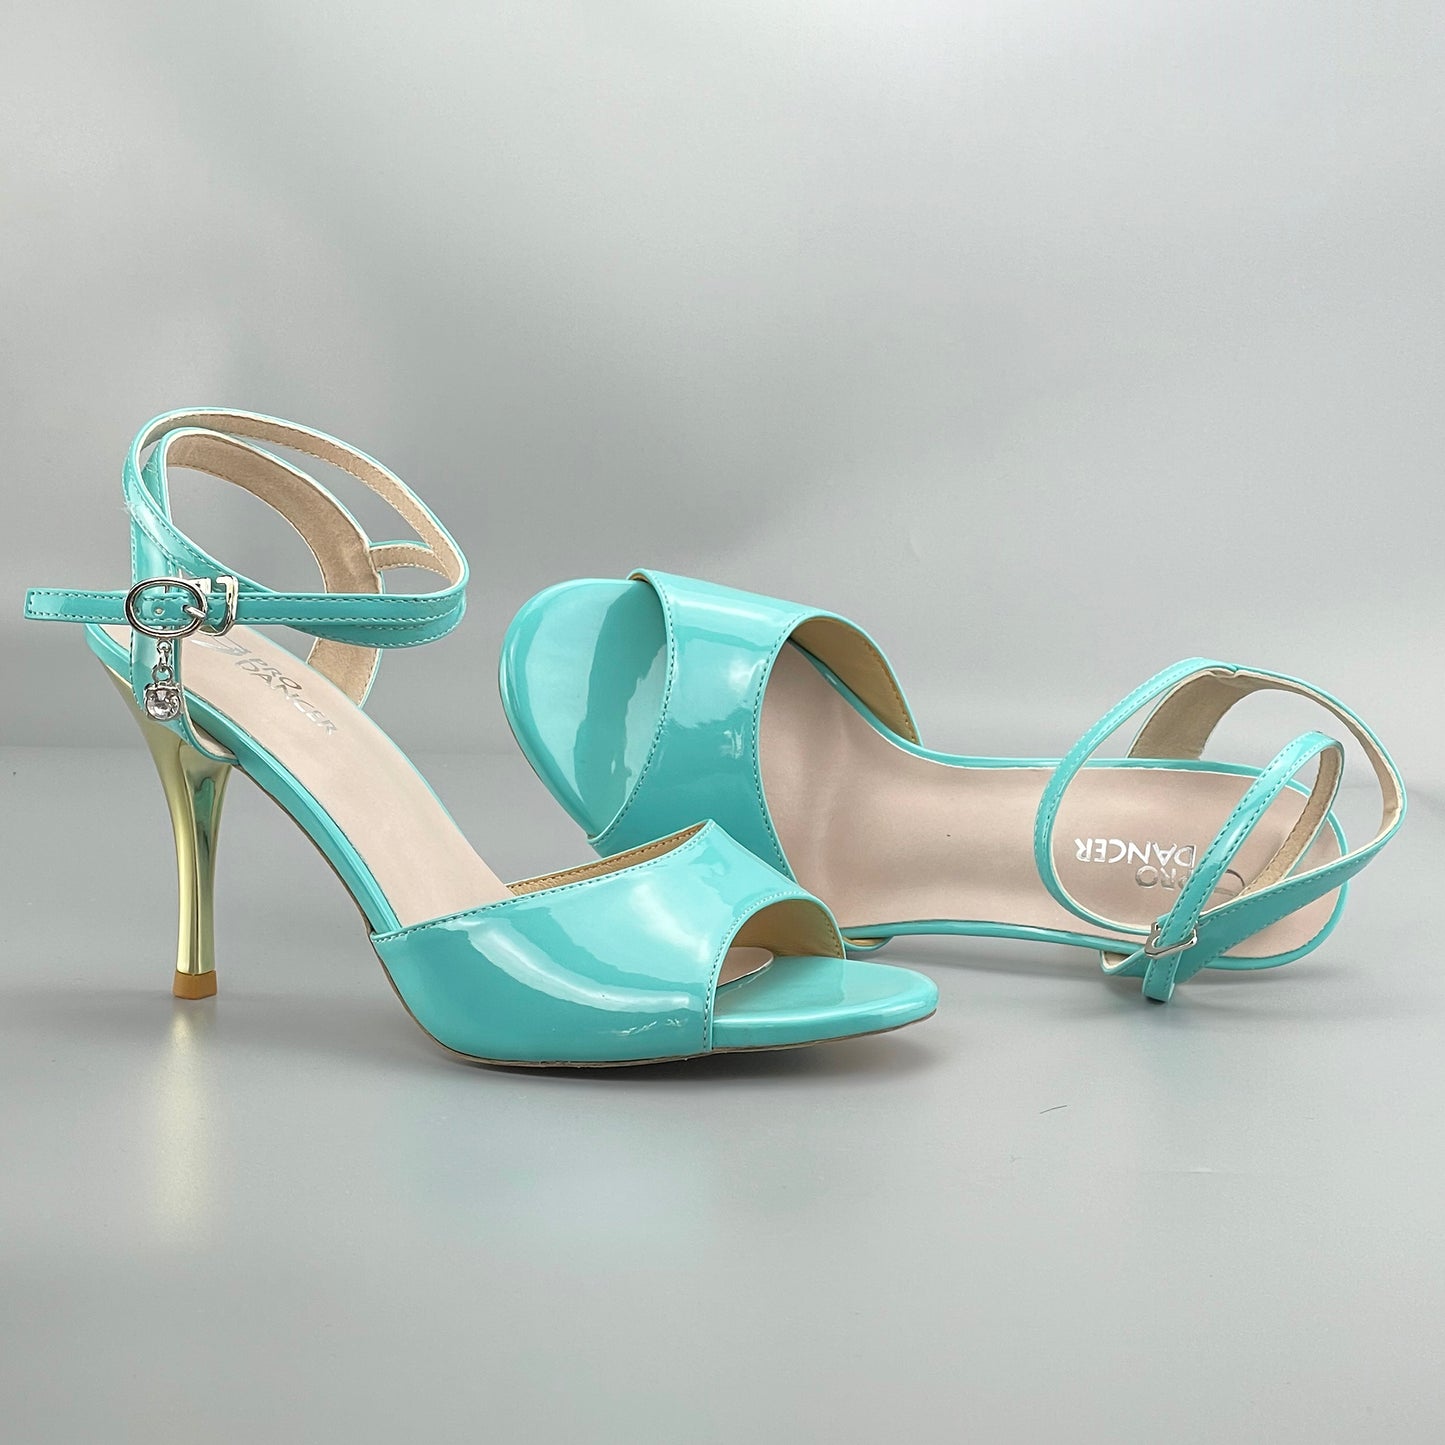 Pro Dancer Peep-toe Argentine Tango Shoes Closed-back High Heels Hard Leather Sole Blue (PD-9050A)